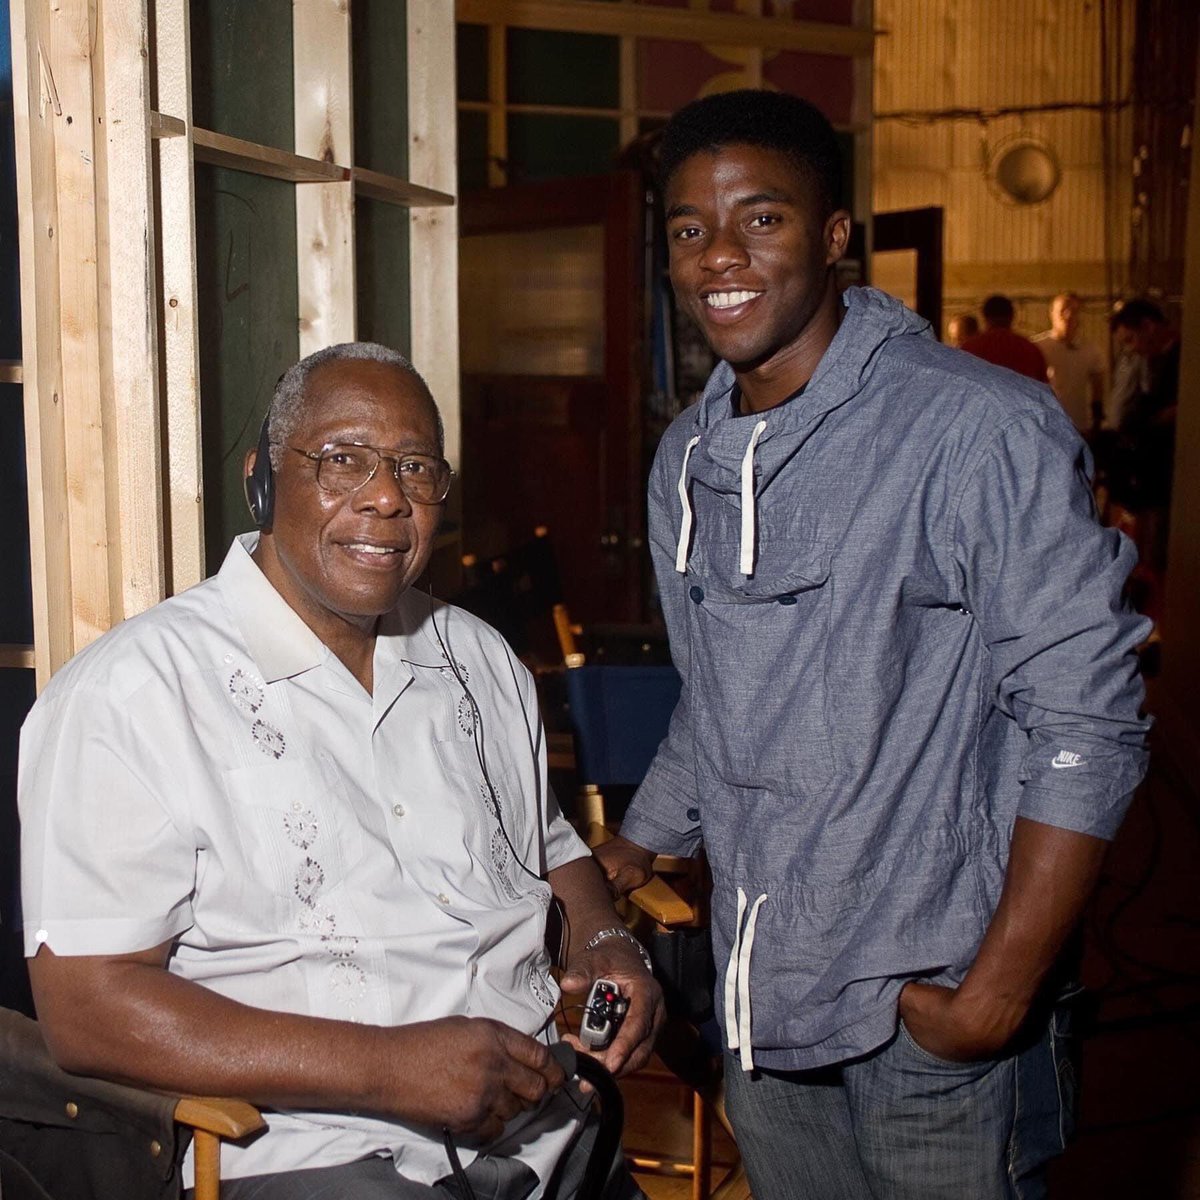 RT @nut_history: Chadwick Boseman did such a good job portraying Jackie Robinson. Here he is with Henry Aaron https://t.co/KYaQioCoWk